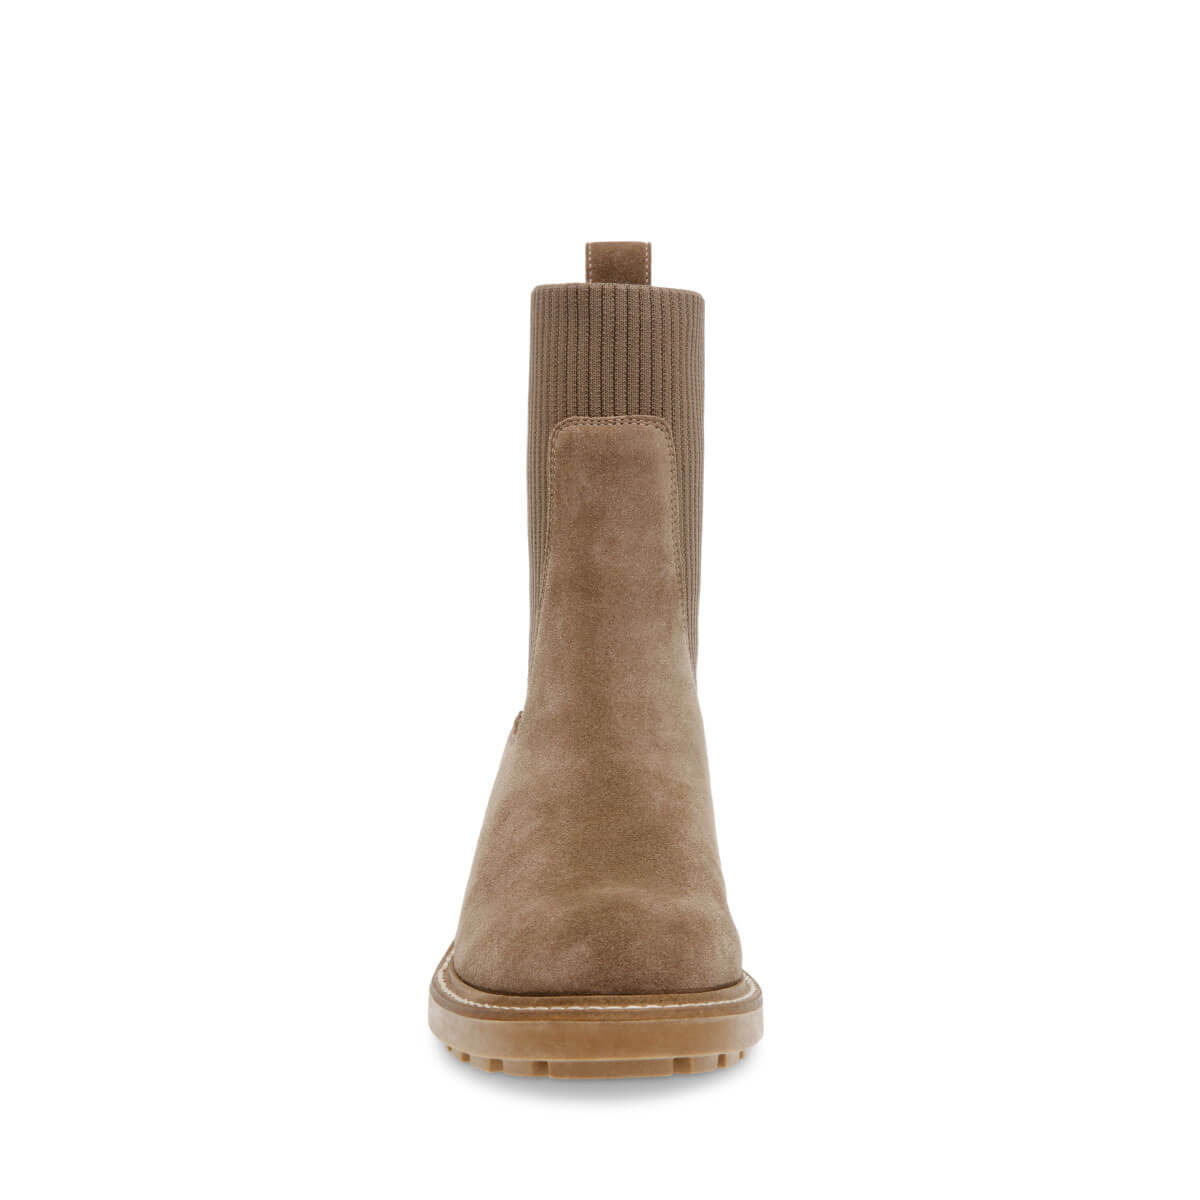 Steve Madden Kiley Platform Bootie taupe front | MILK MONEY milkmoney.co | cute shoes for women. ladies shoes. nice shoes for women. footwear for women. ladies shoes online. ladies footwear. womens shoes and boots. pretty shoes for women. beautiful shoes for women.